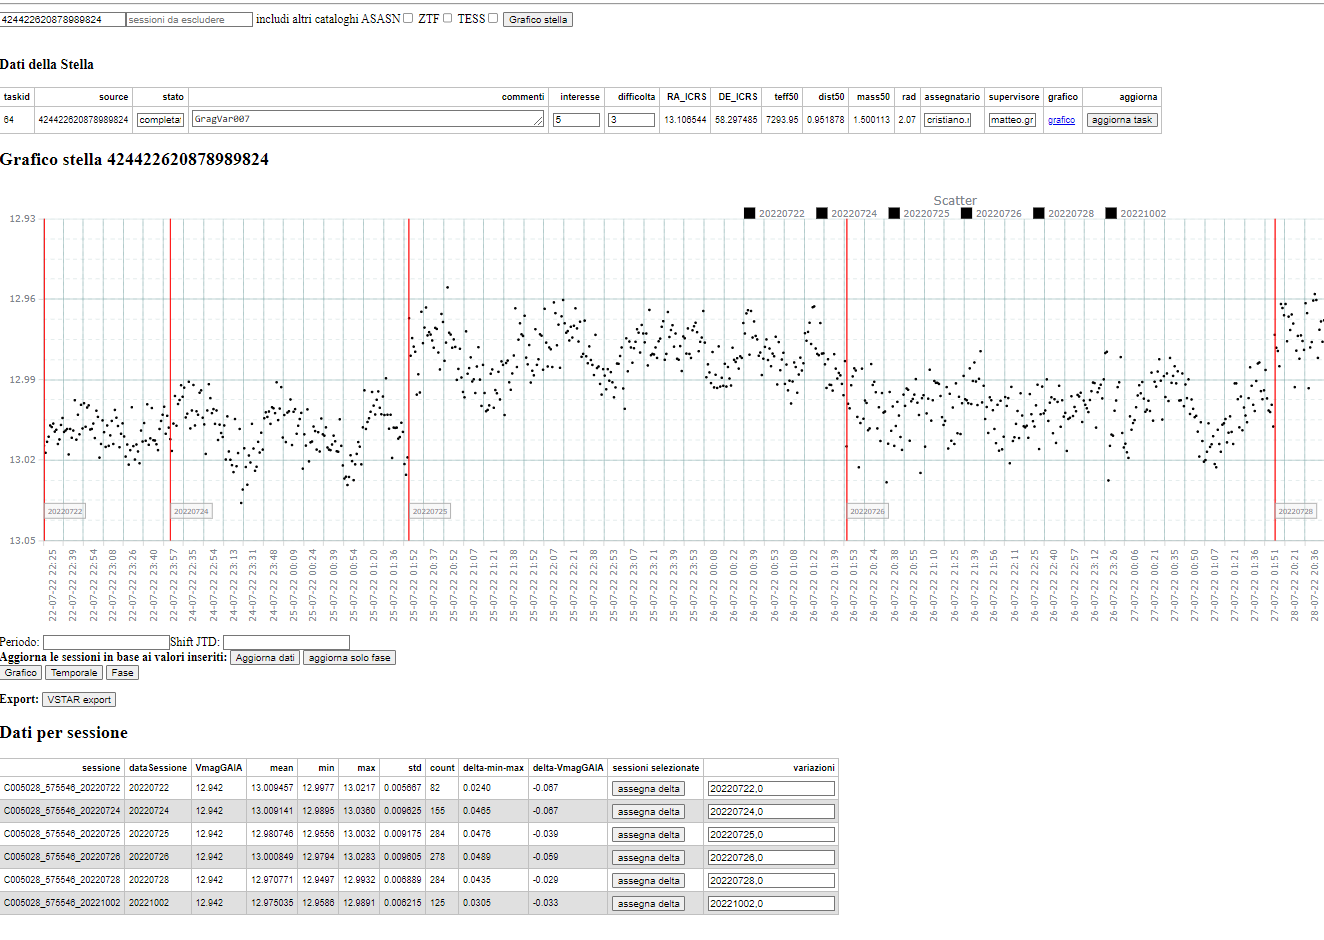 Screenshot of AnyChart JS Charts in Use at Gruppo Astrofili Galileo Galilei for Astronomical Data Visualization